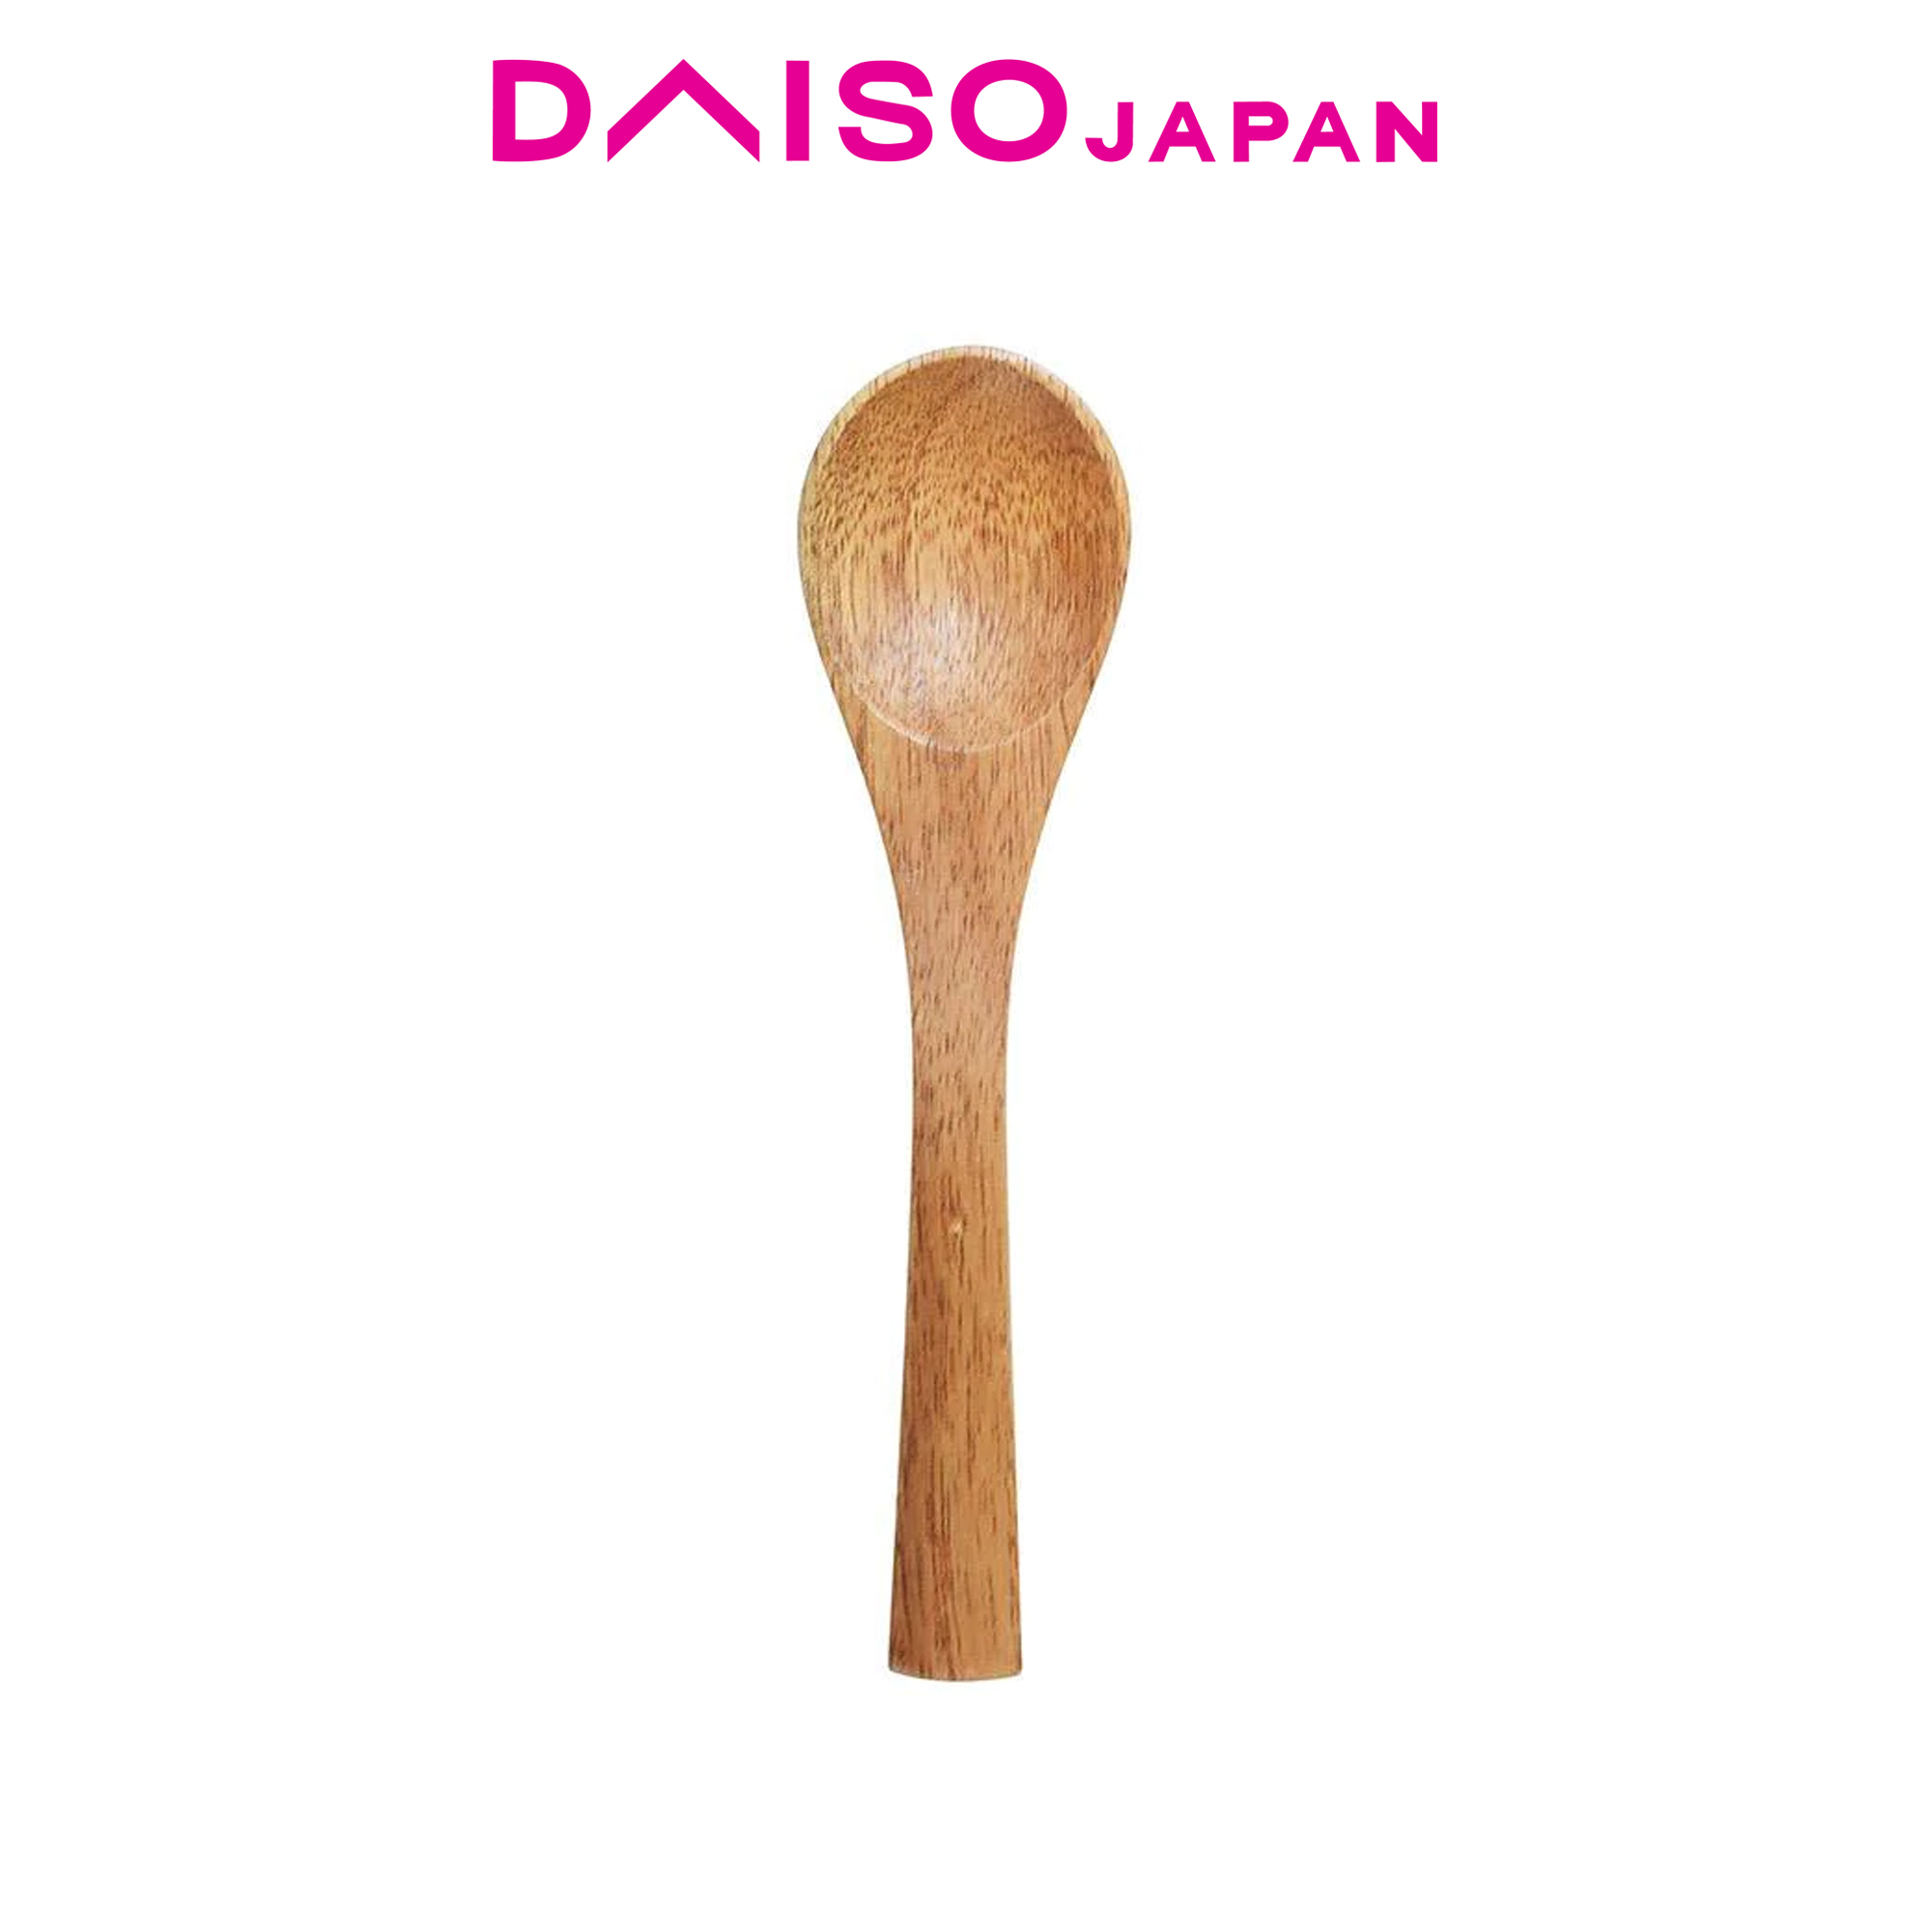 Buy Laser Engraved Spoons with Anime Kyojin Eren Titan Personalized Spoon  Stainless Steel Silverware Cereal Tablespoons Custom Ice cream Spoons  Food-Dessert-Tea-Coffee Stir Spoon Engraved Gag Geeky Gift Online at Low  Prices in